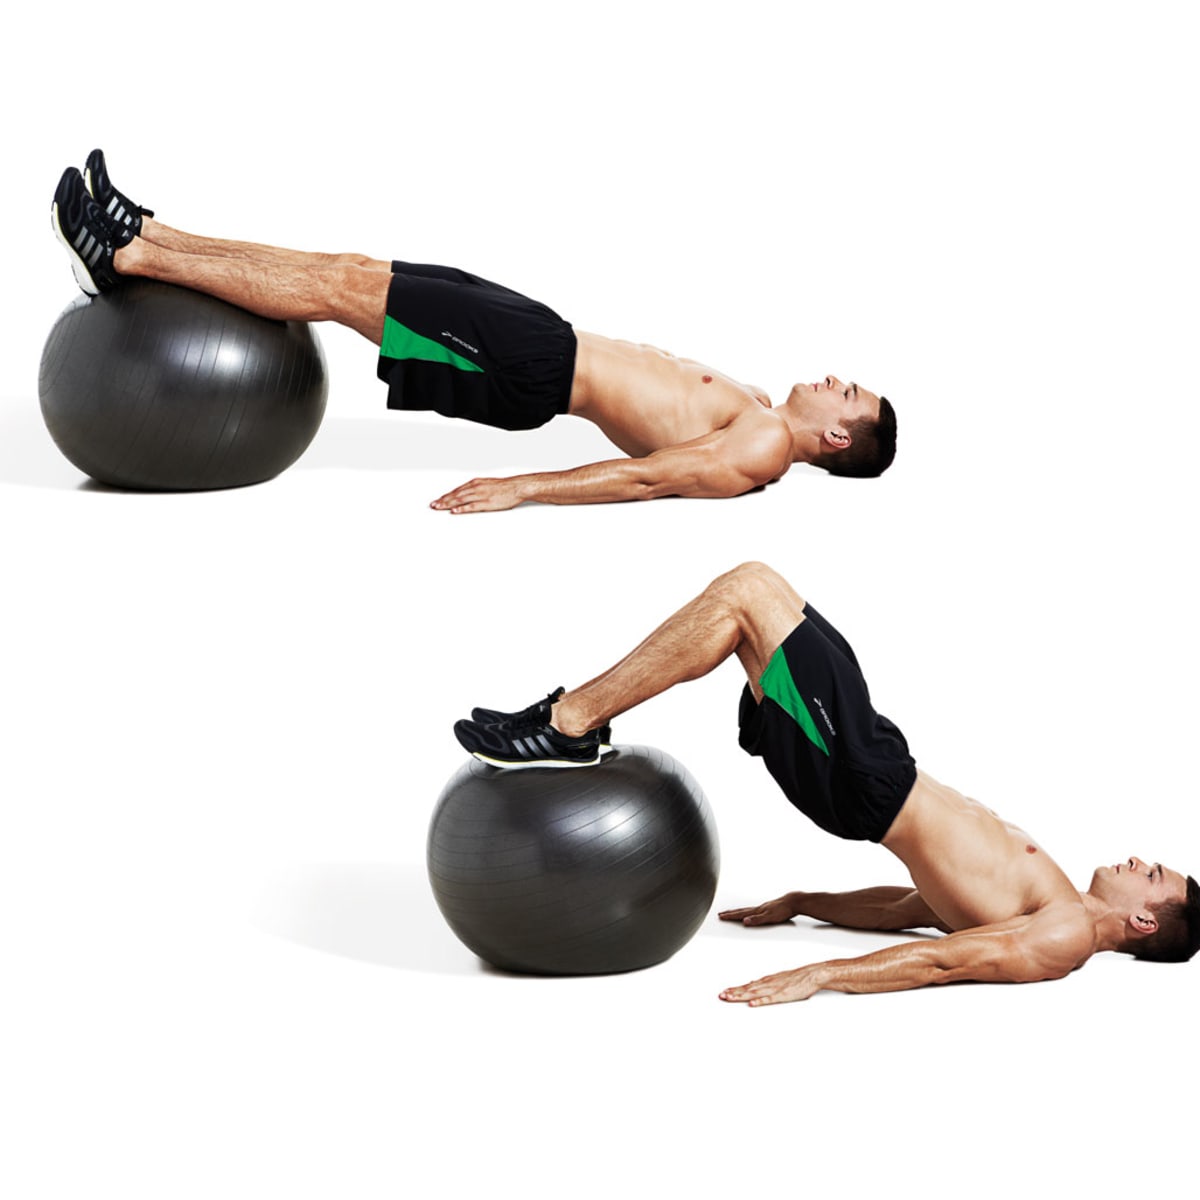 8 Yoga Ball Workouts for a Toned Core